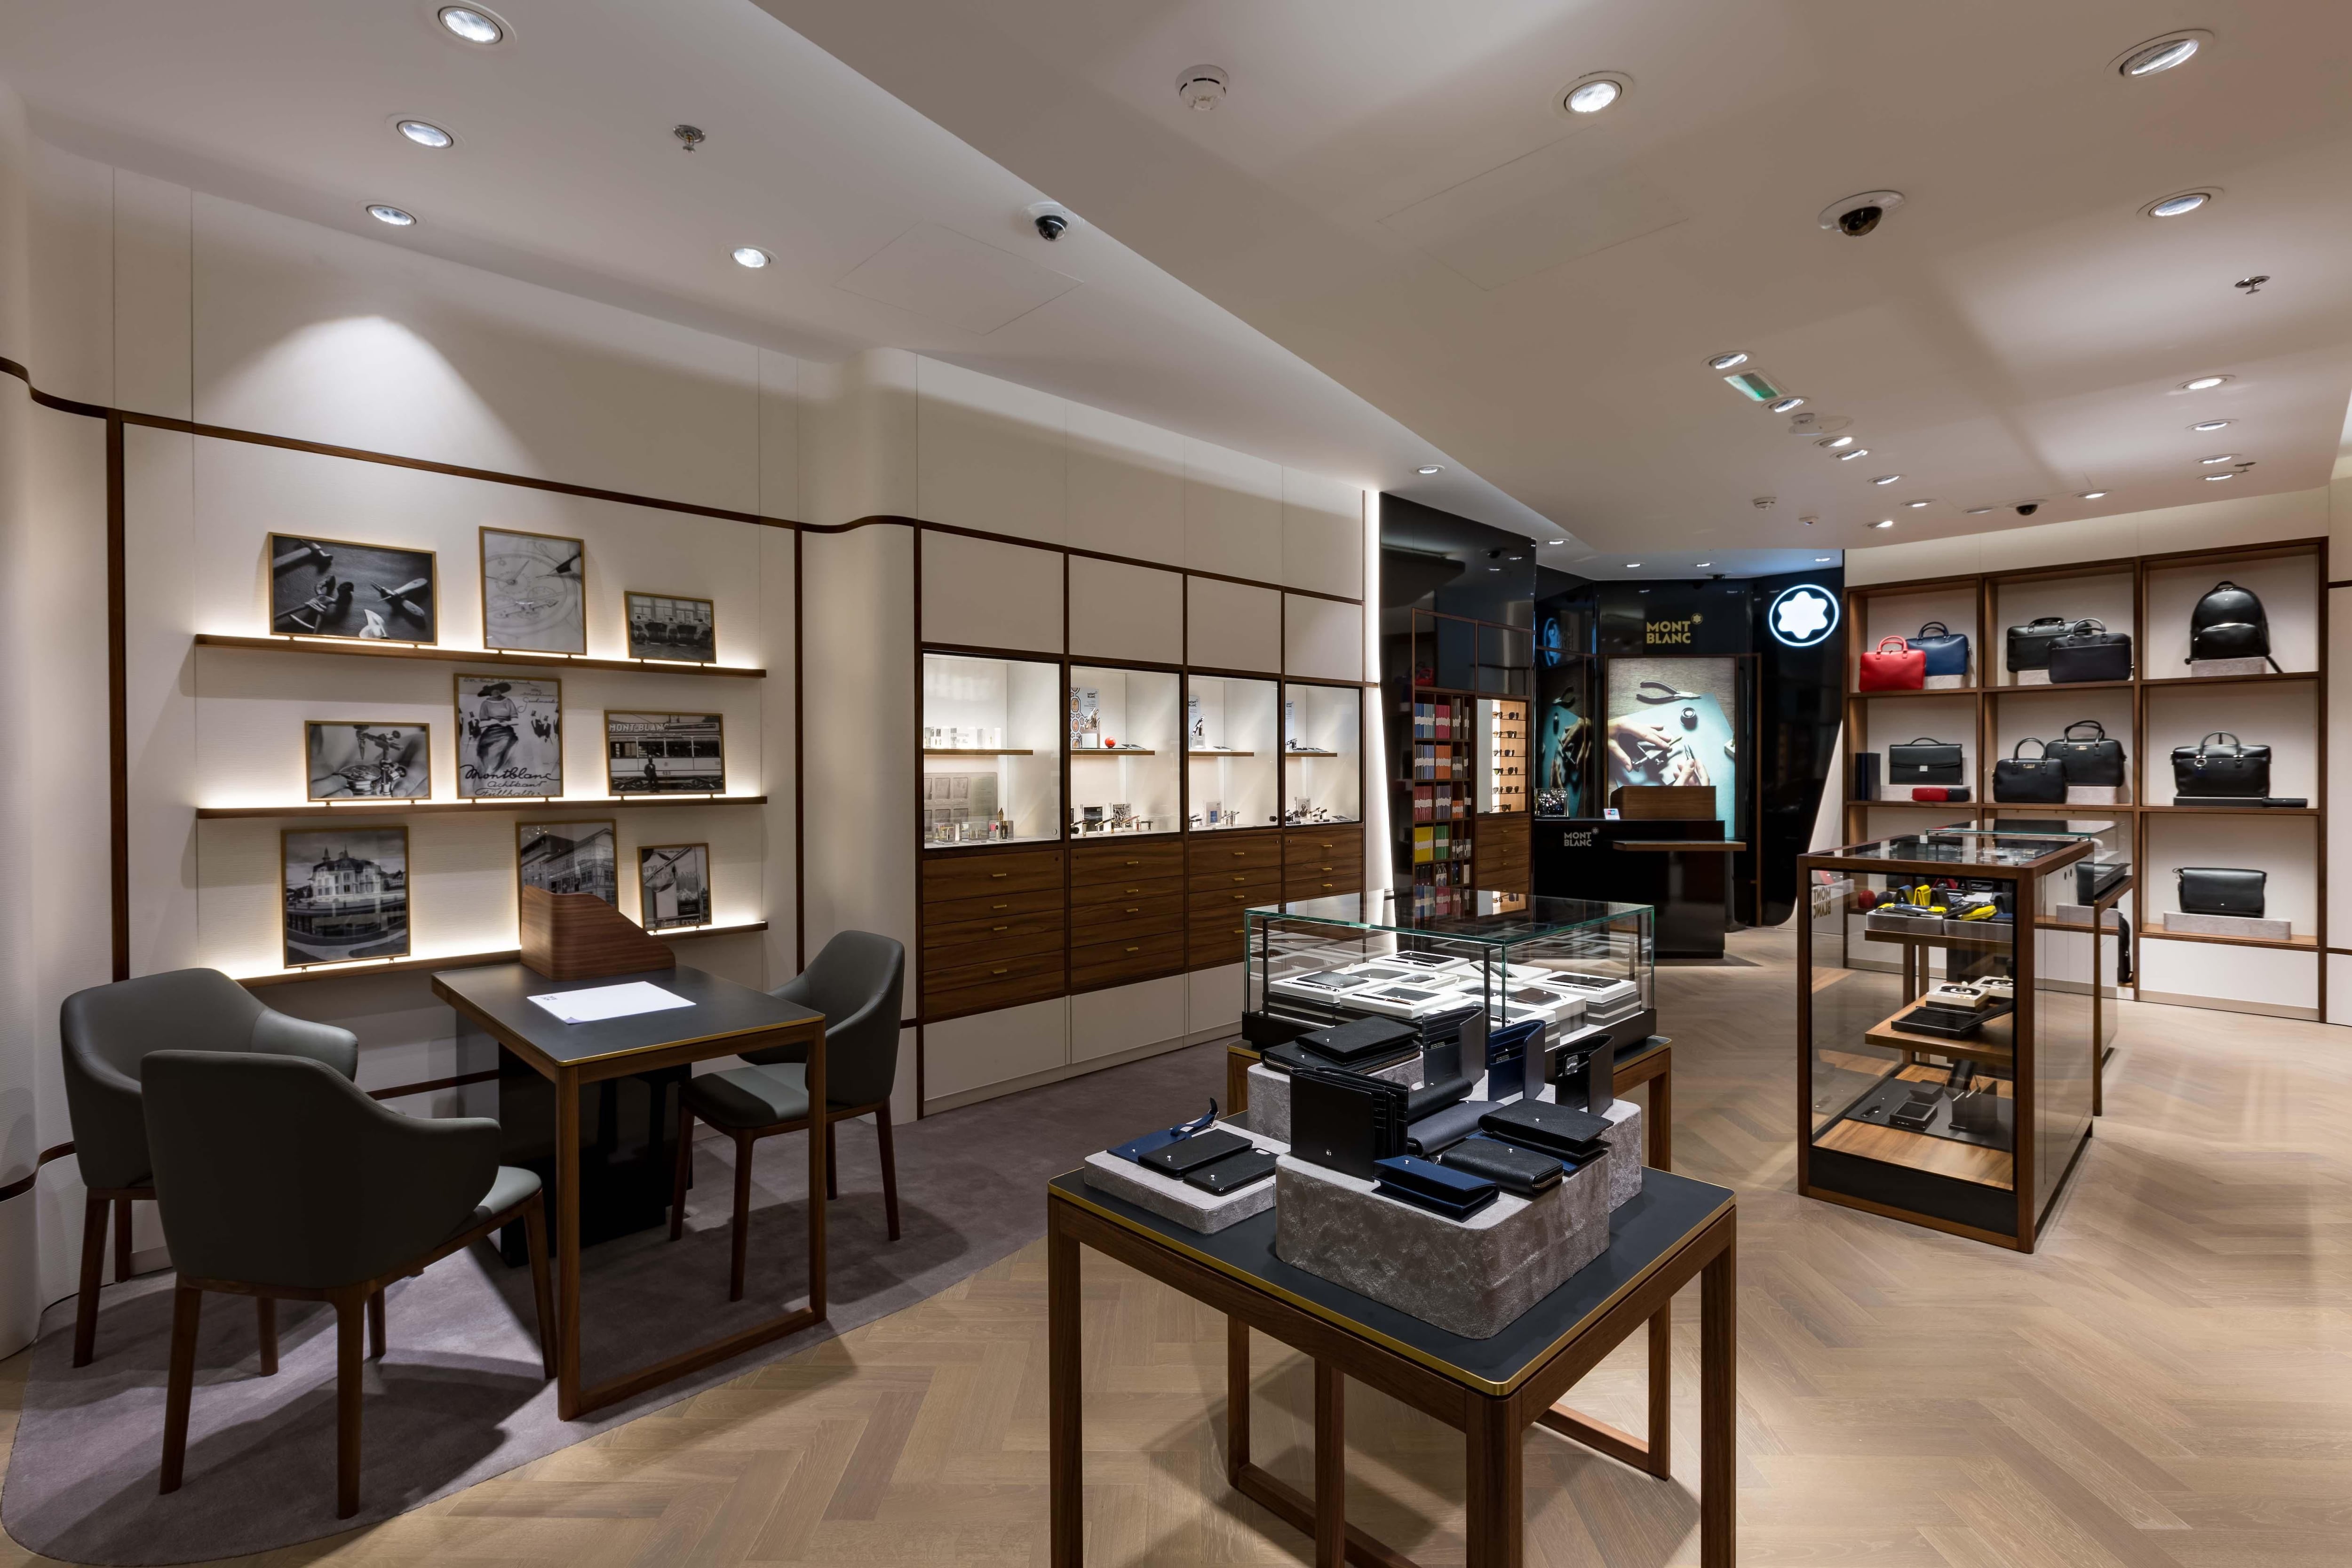 Montblanc Has Launched A New Boutique Concept Called NEO 3.0 At